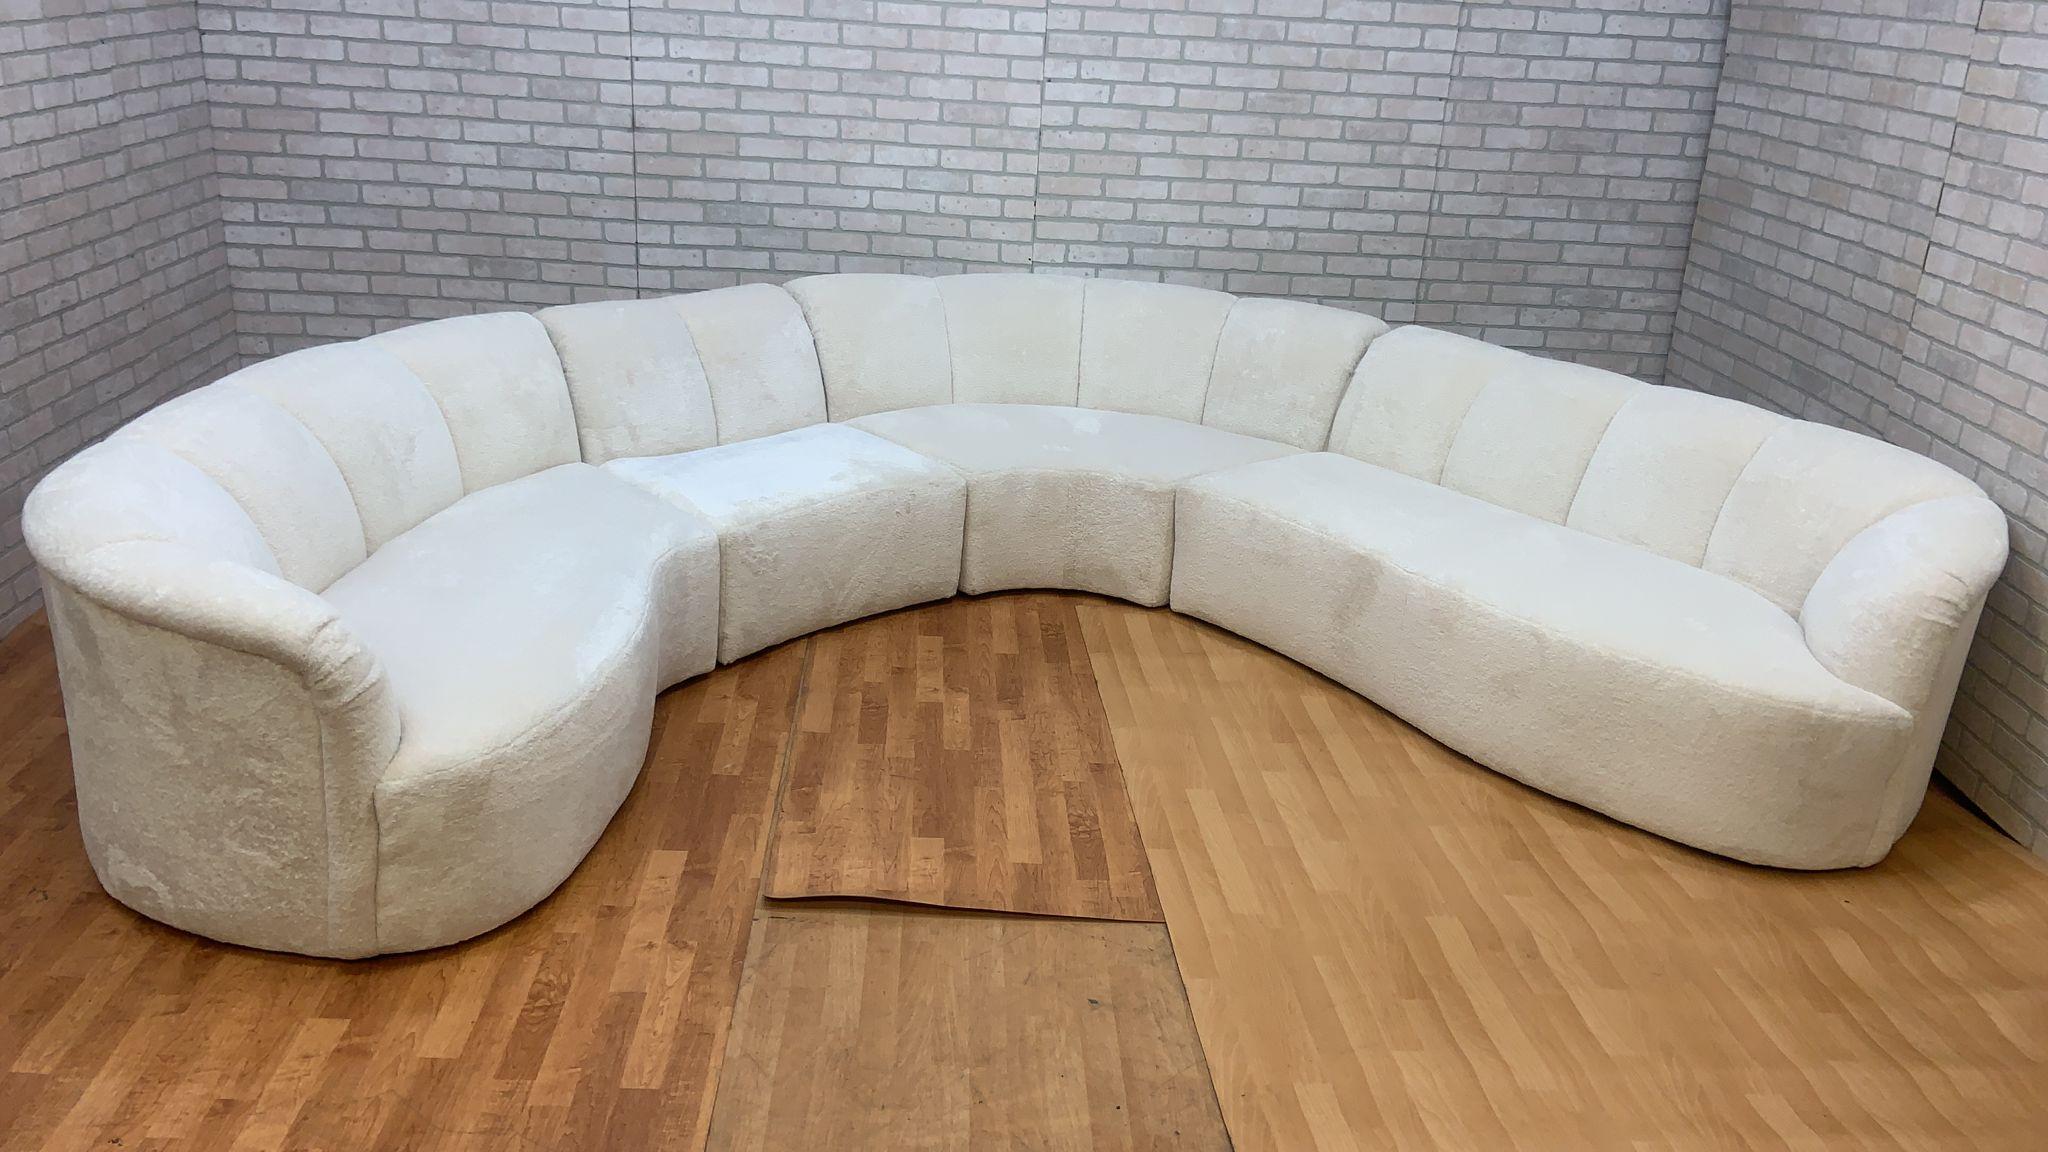 Curved Channel Back Serpentine Sectional Sofa Newly Upholstered in Alpaca Wool 7